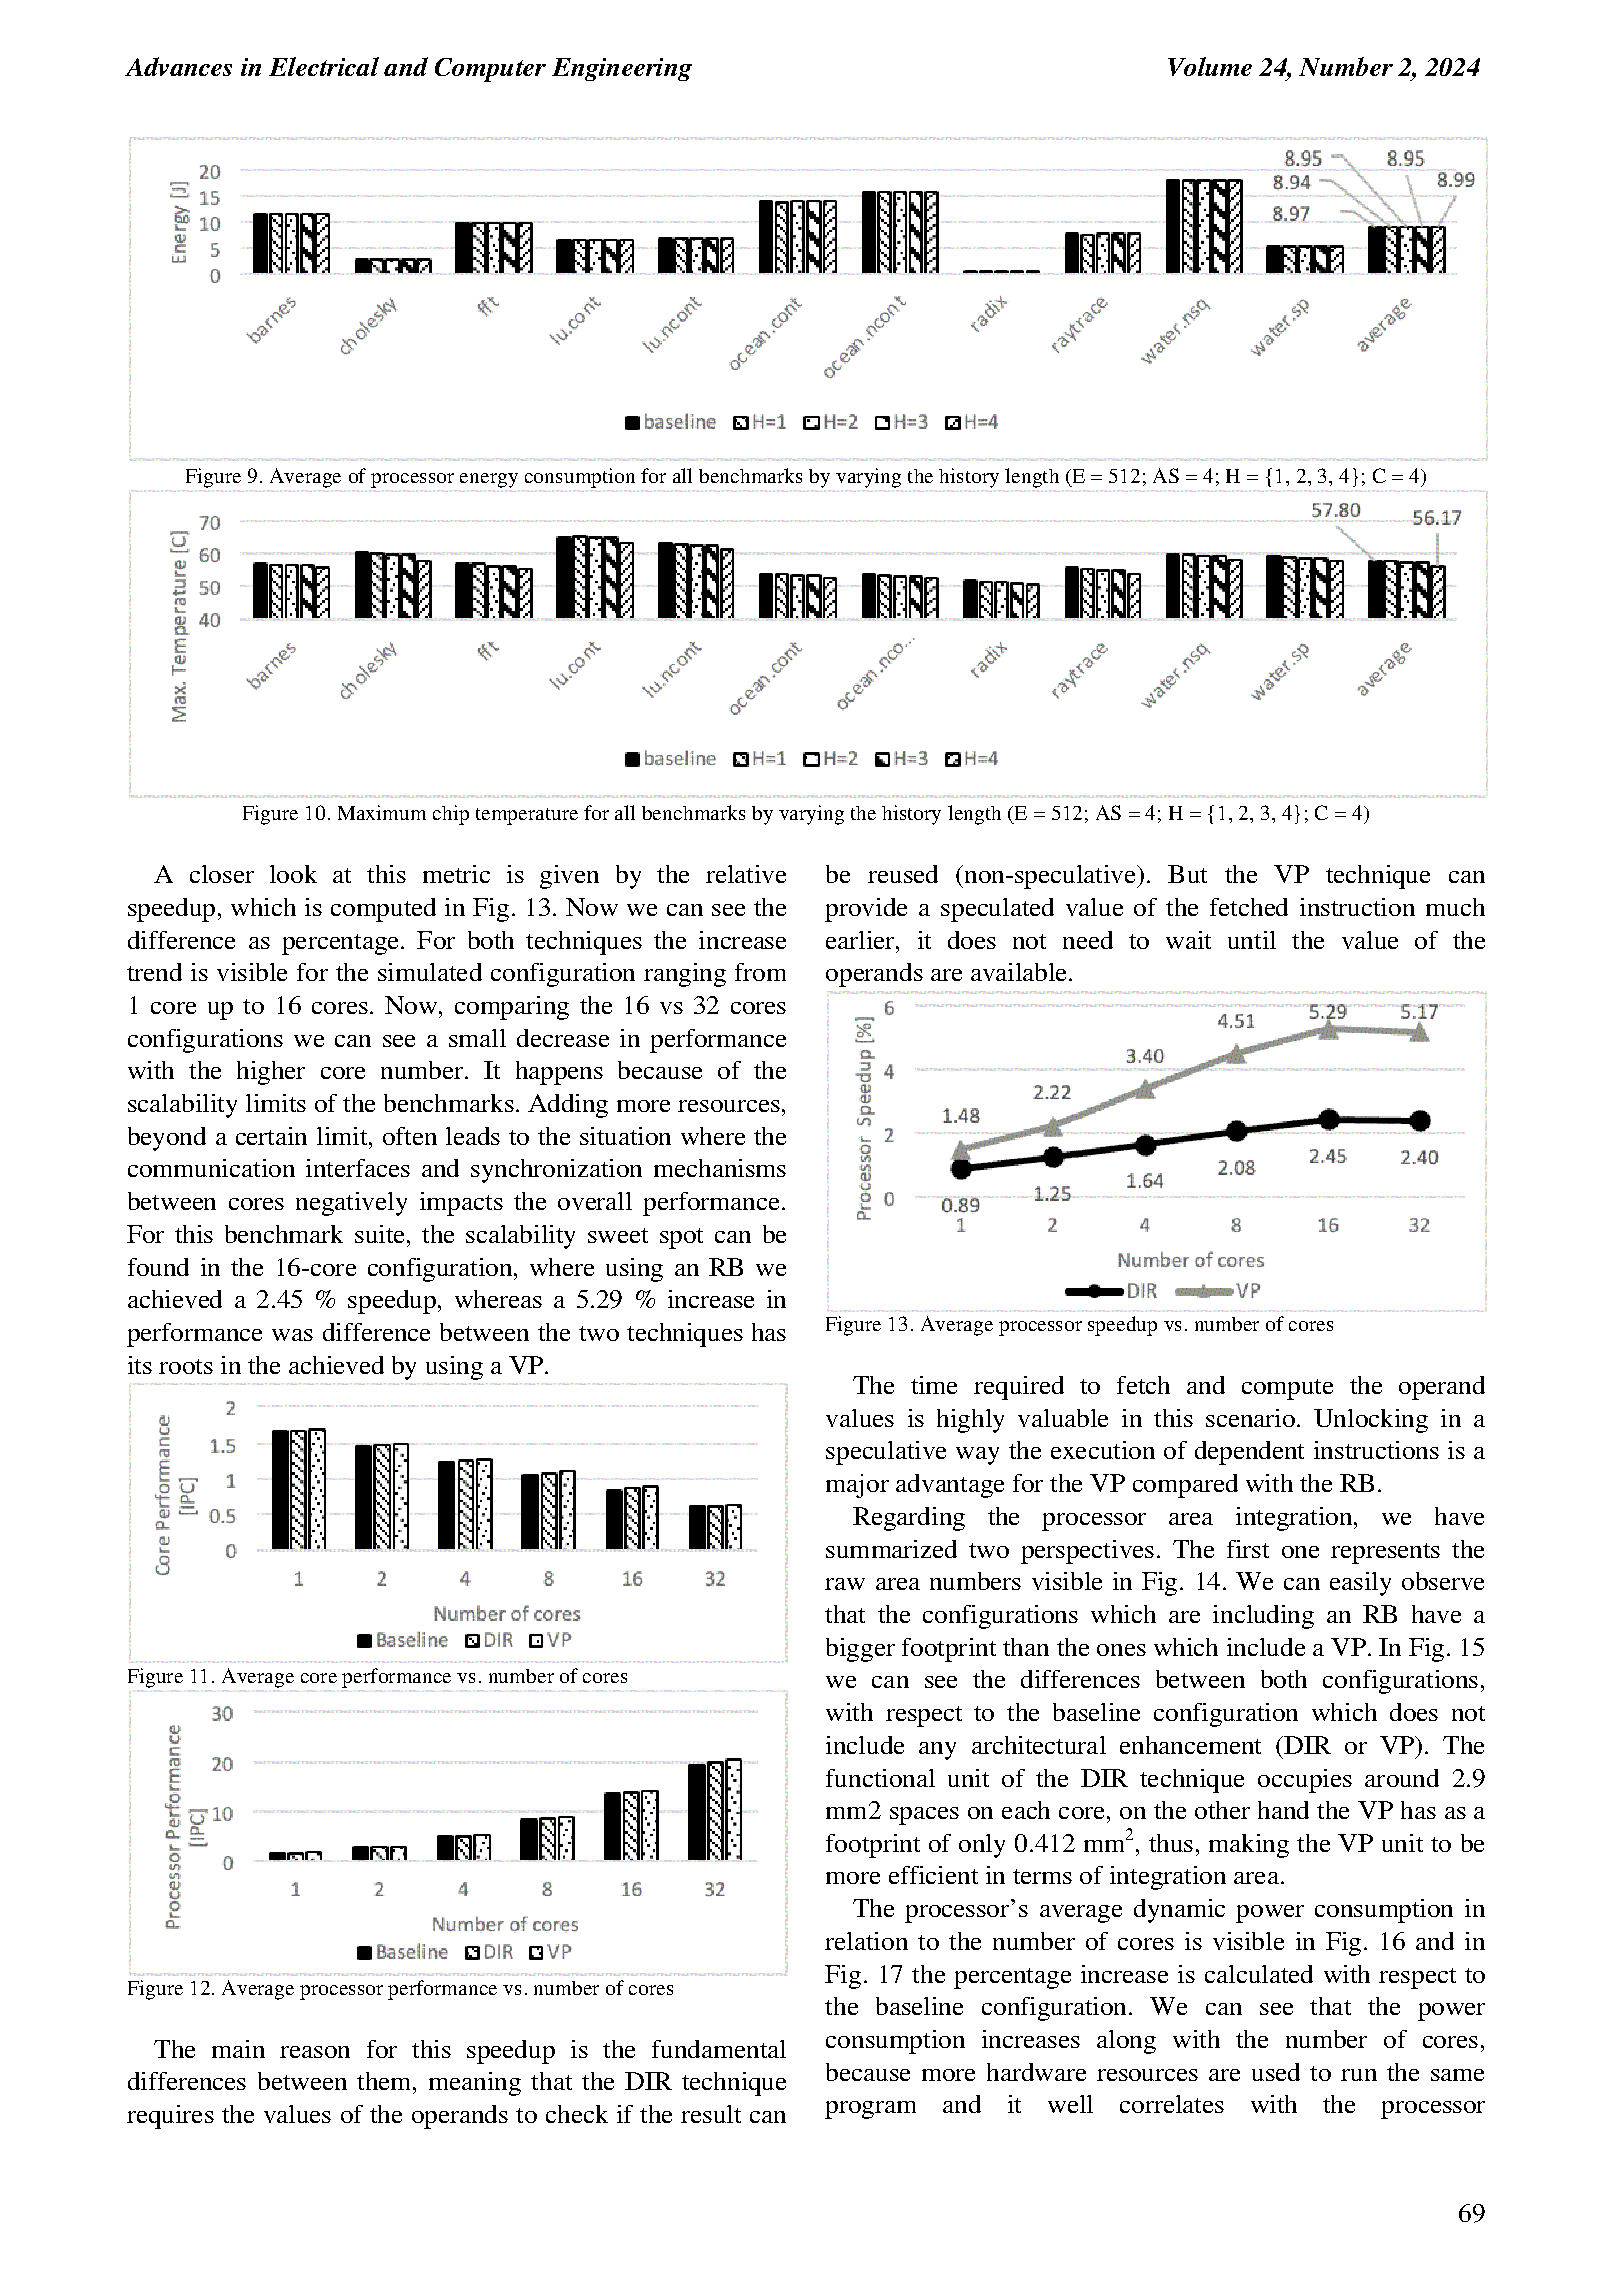 PDF Quickview for paper with DOI:10.4316/AECE.2024.02007